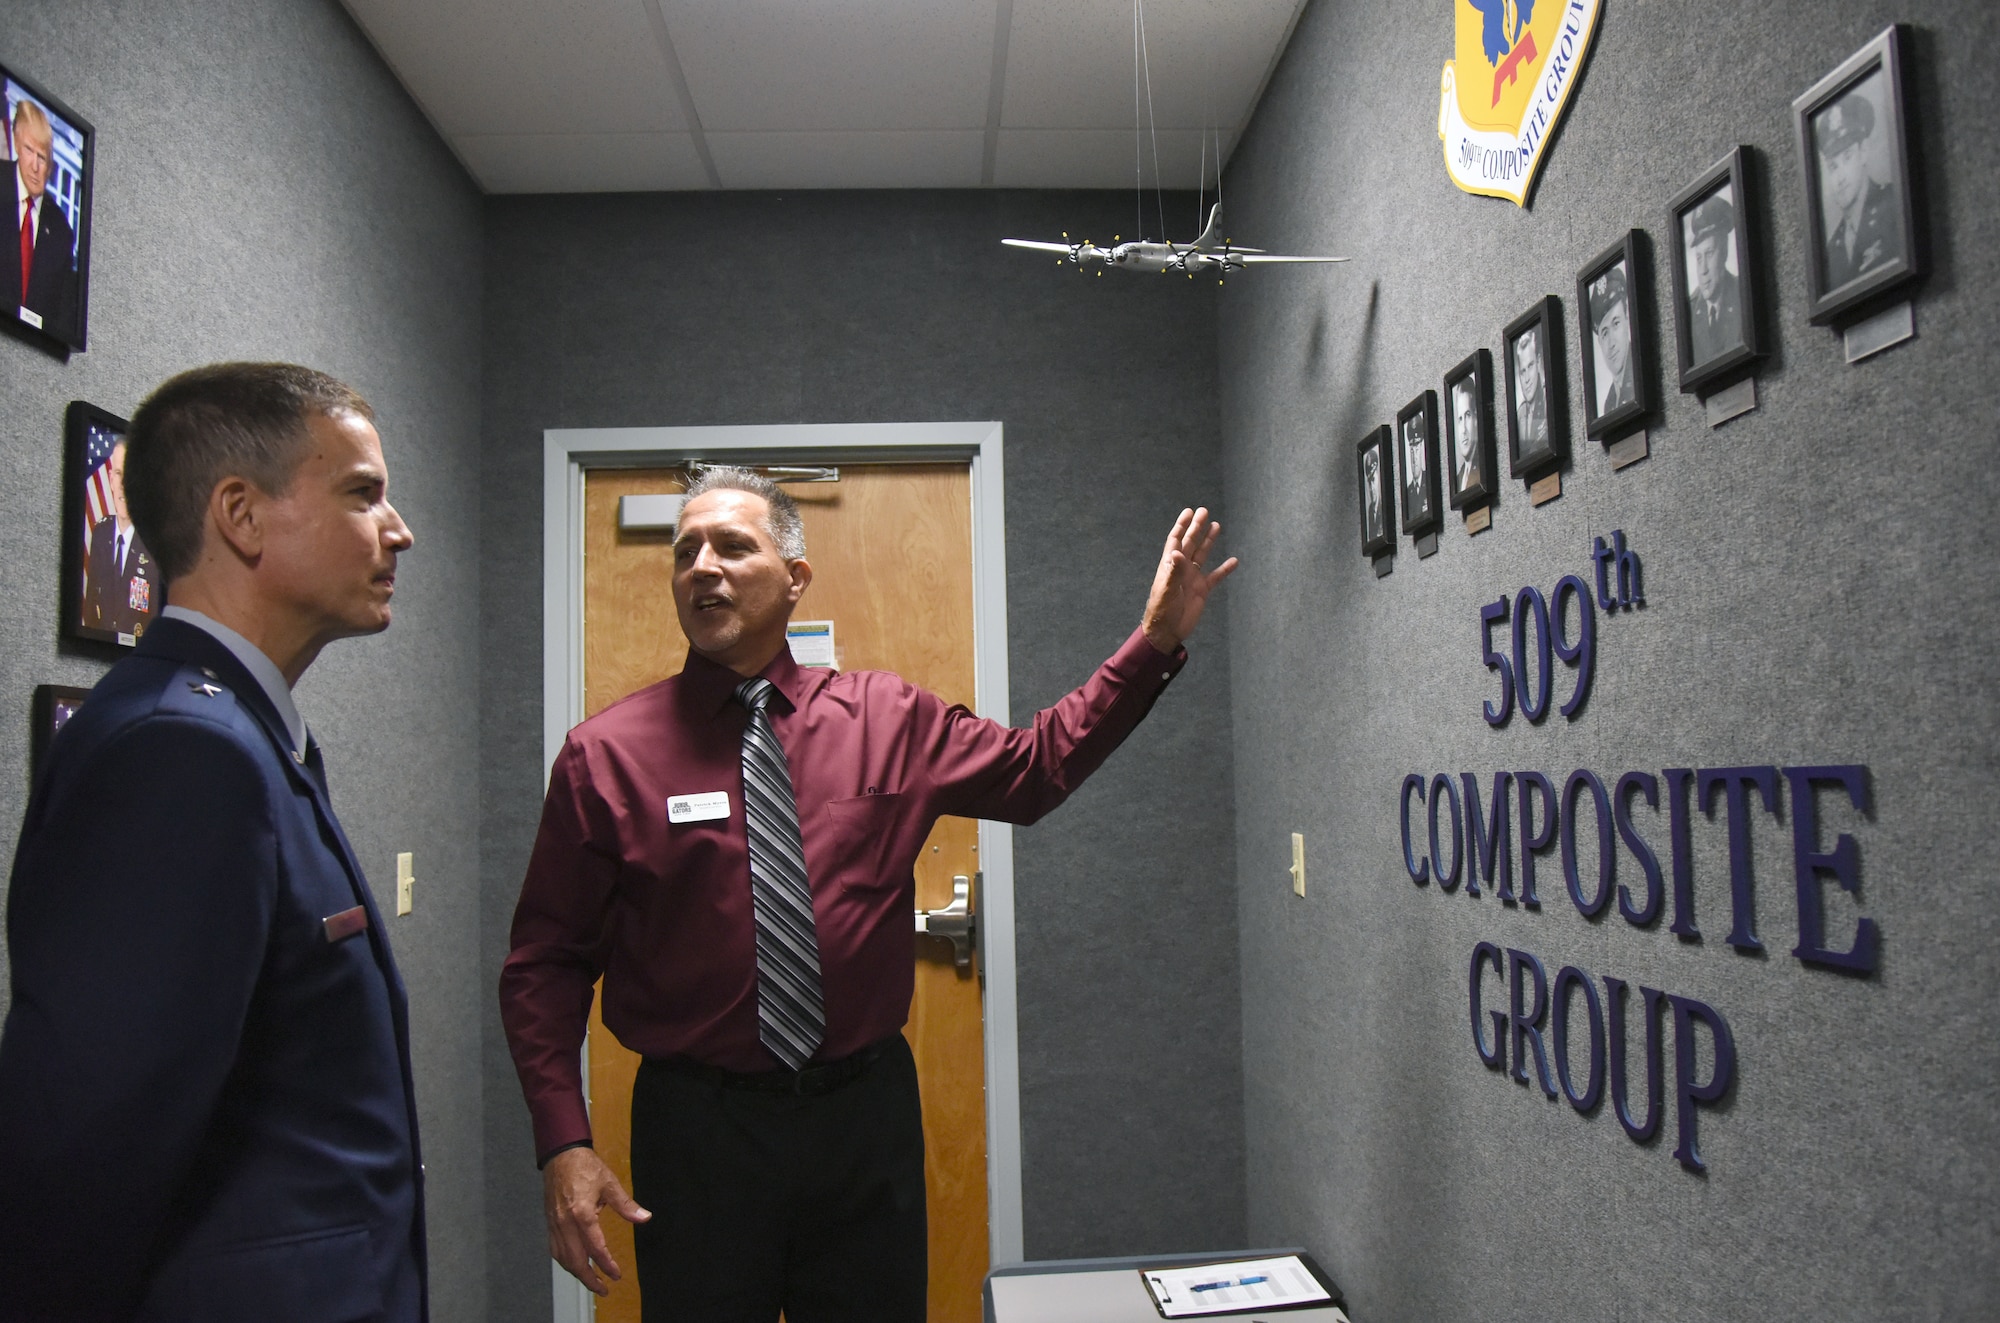 Patrick Myers, 334th Training Squadron command and control operations apprentice course master instructor, provides a tour to U.S. Air Force Brig. Gen. Paul W. Tibbets IV, Air Force Global Strike Command deputy commander, Barksdale Air Force Base, Louisiana, during a room dedication ceremony at Cody Hall on Keesler Air Force Base, Mississippi, Sept. 14, 2018. The dedication honored Tibbets' grandfather, retired Brig. Gen. Paul W. Tibbets Jr., by dedicating the 334th Training Squadron Command and Control simulator in his name. Tibbets Jr., piloted the Enola Gay, which dropped the world's first atomic bomb. (U.S. Air Force photo by Kemberly Groue)